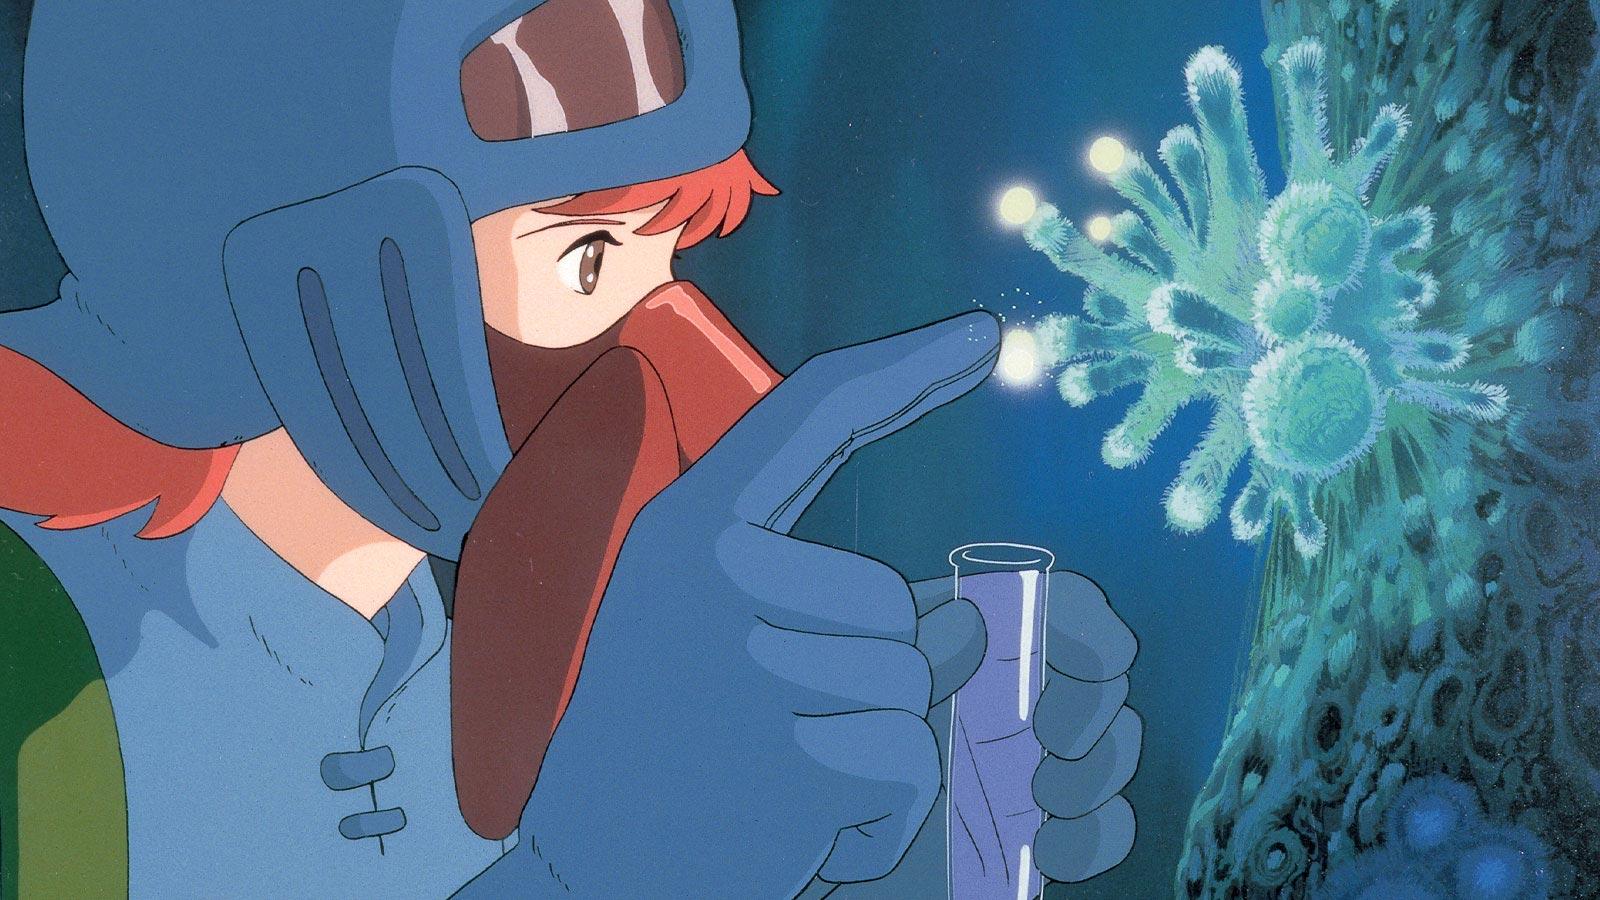 Scene from the film Nausicaä of the Valley of the Wind